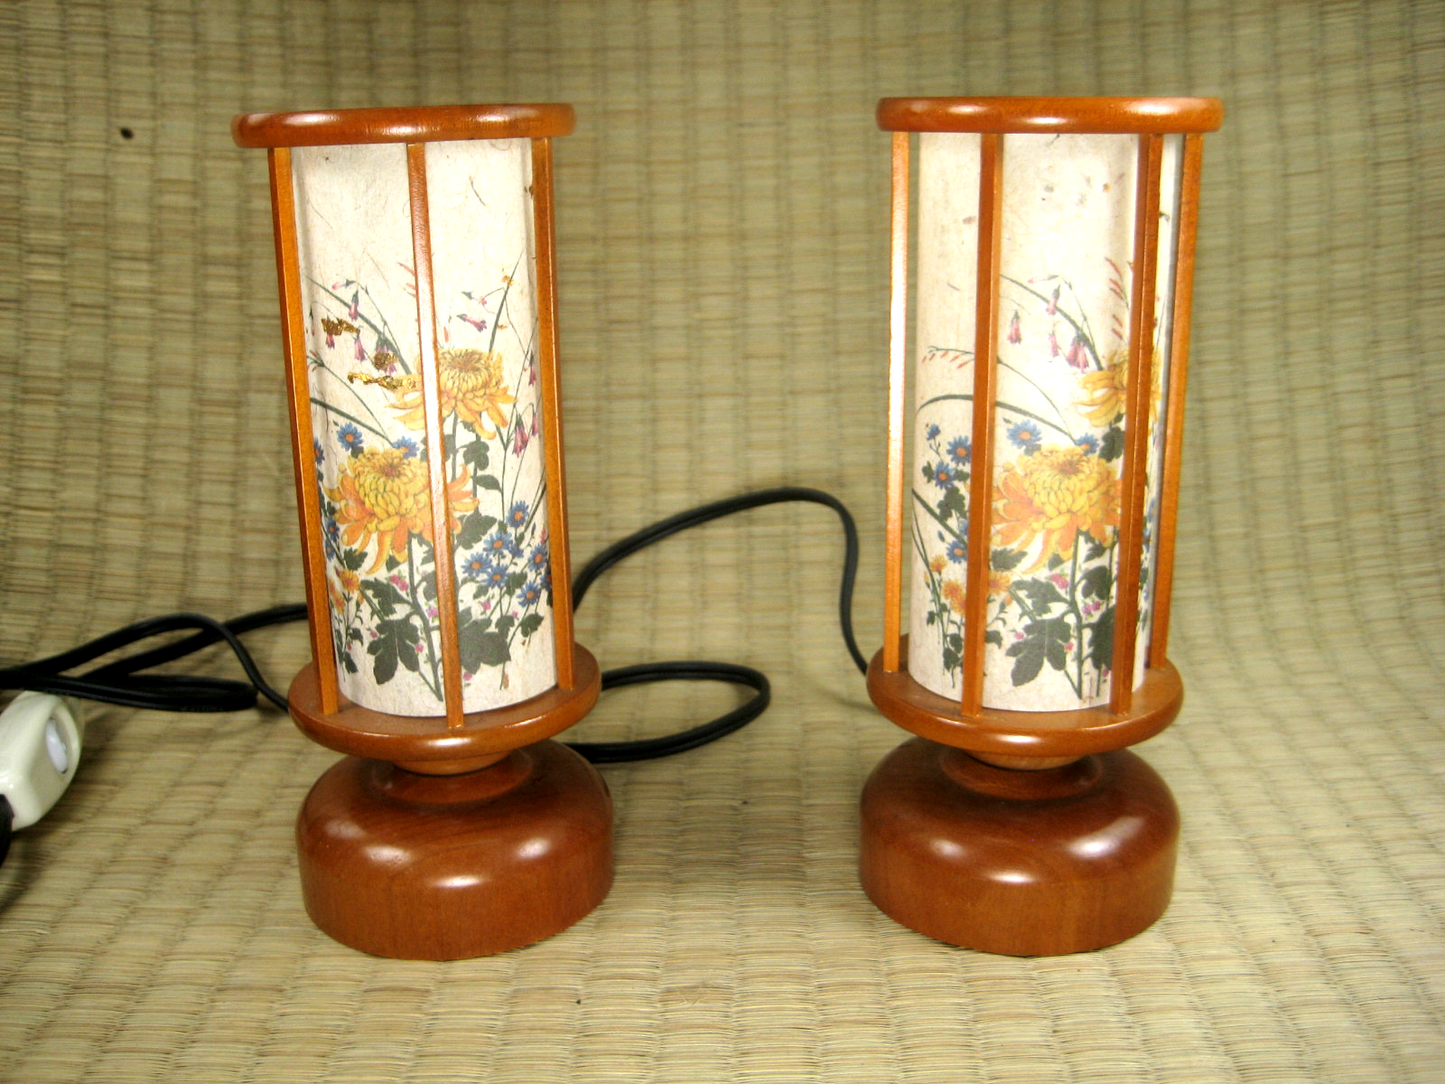 Set OfSmall Electric Japanese Wood & Paper Lanterns For Use In Home Shrines